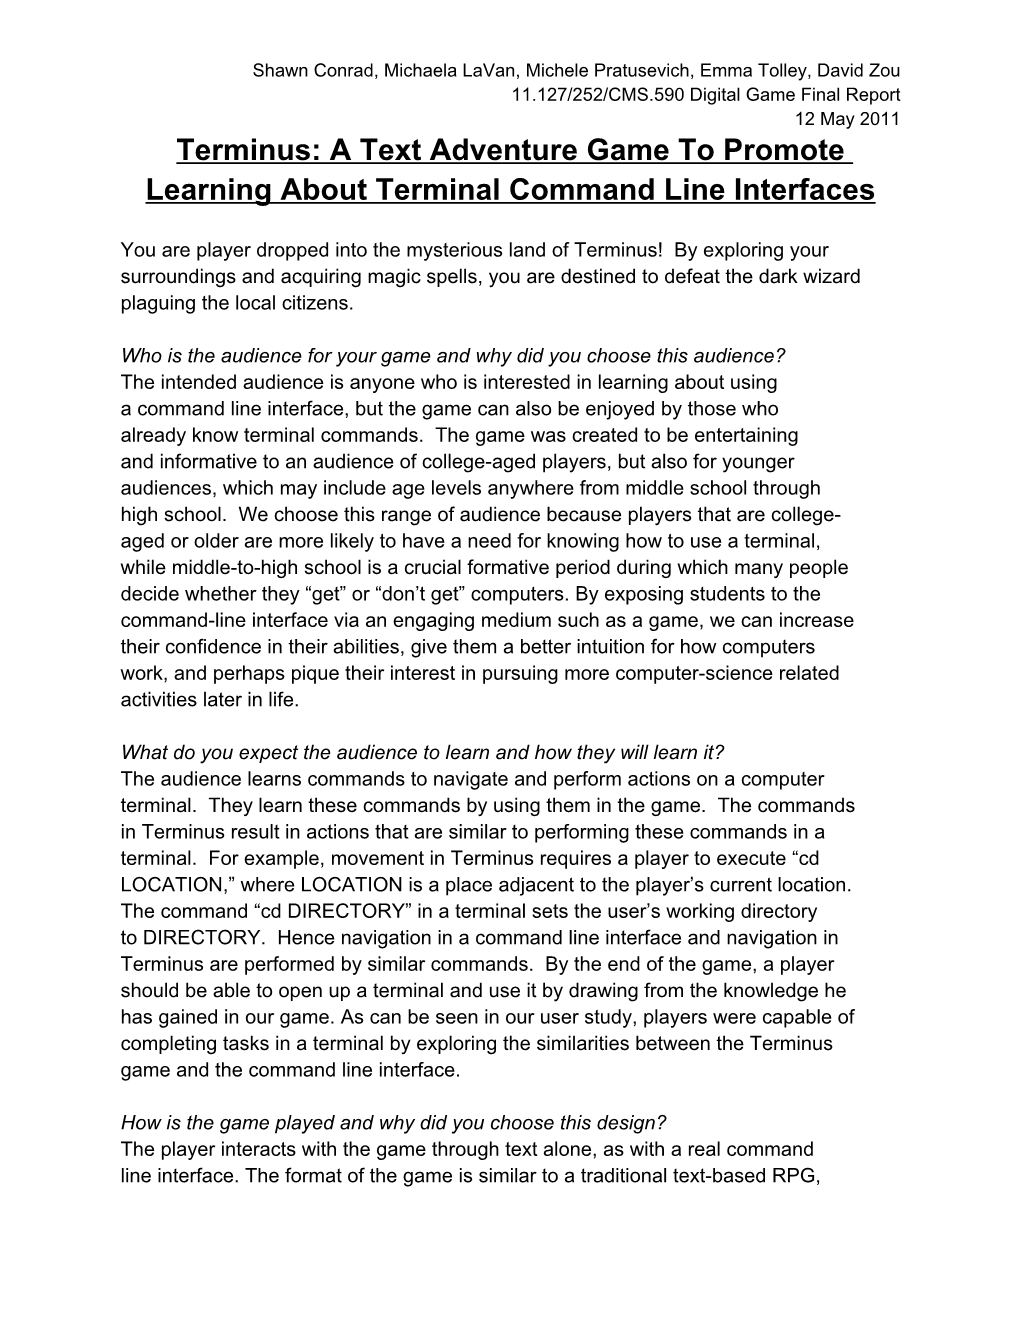 Terminus: a Text Adventure Game to Promote Learning About Terminal Command Line Interfaces